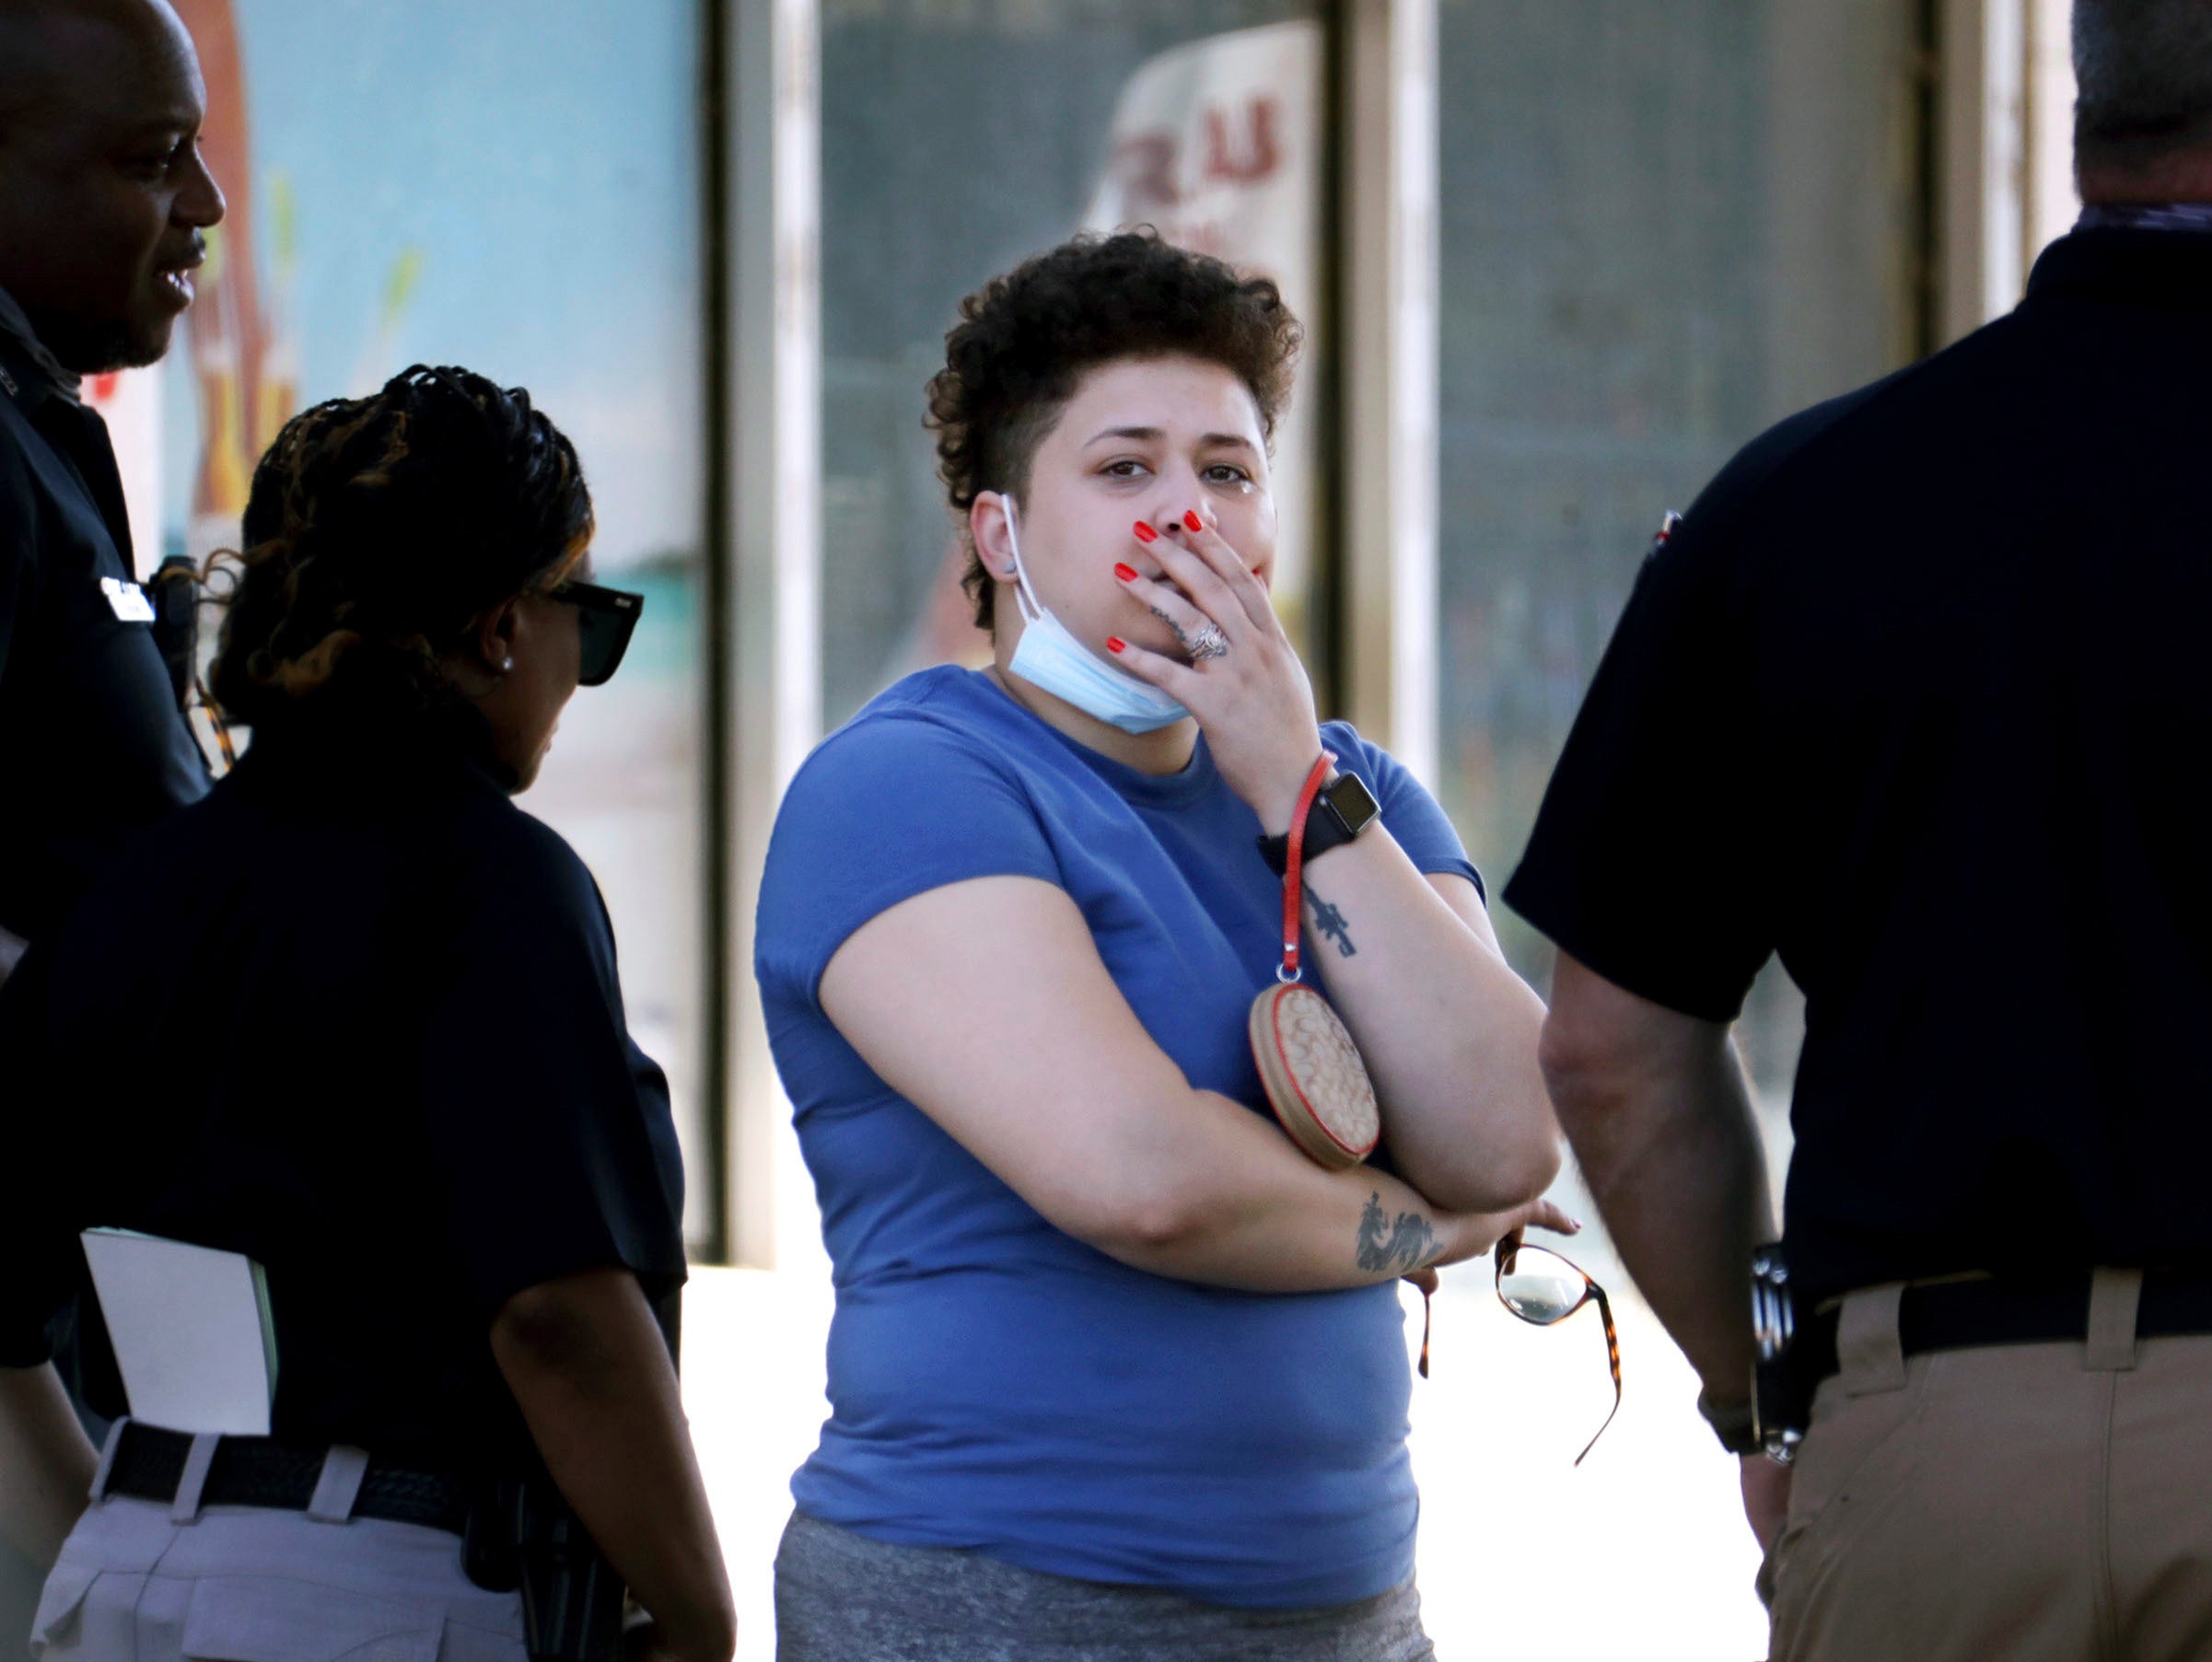 Family members of victims wait with Memphis Police Department officers outside of a post office after a shooting